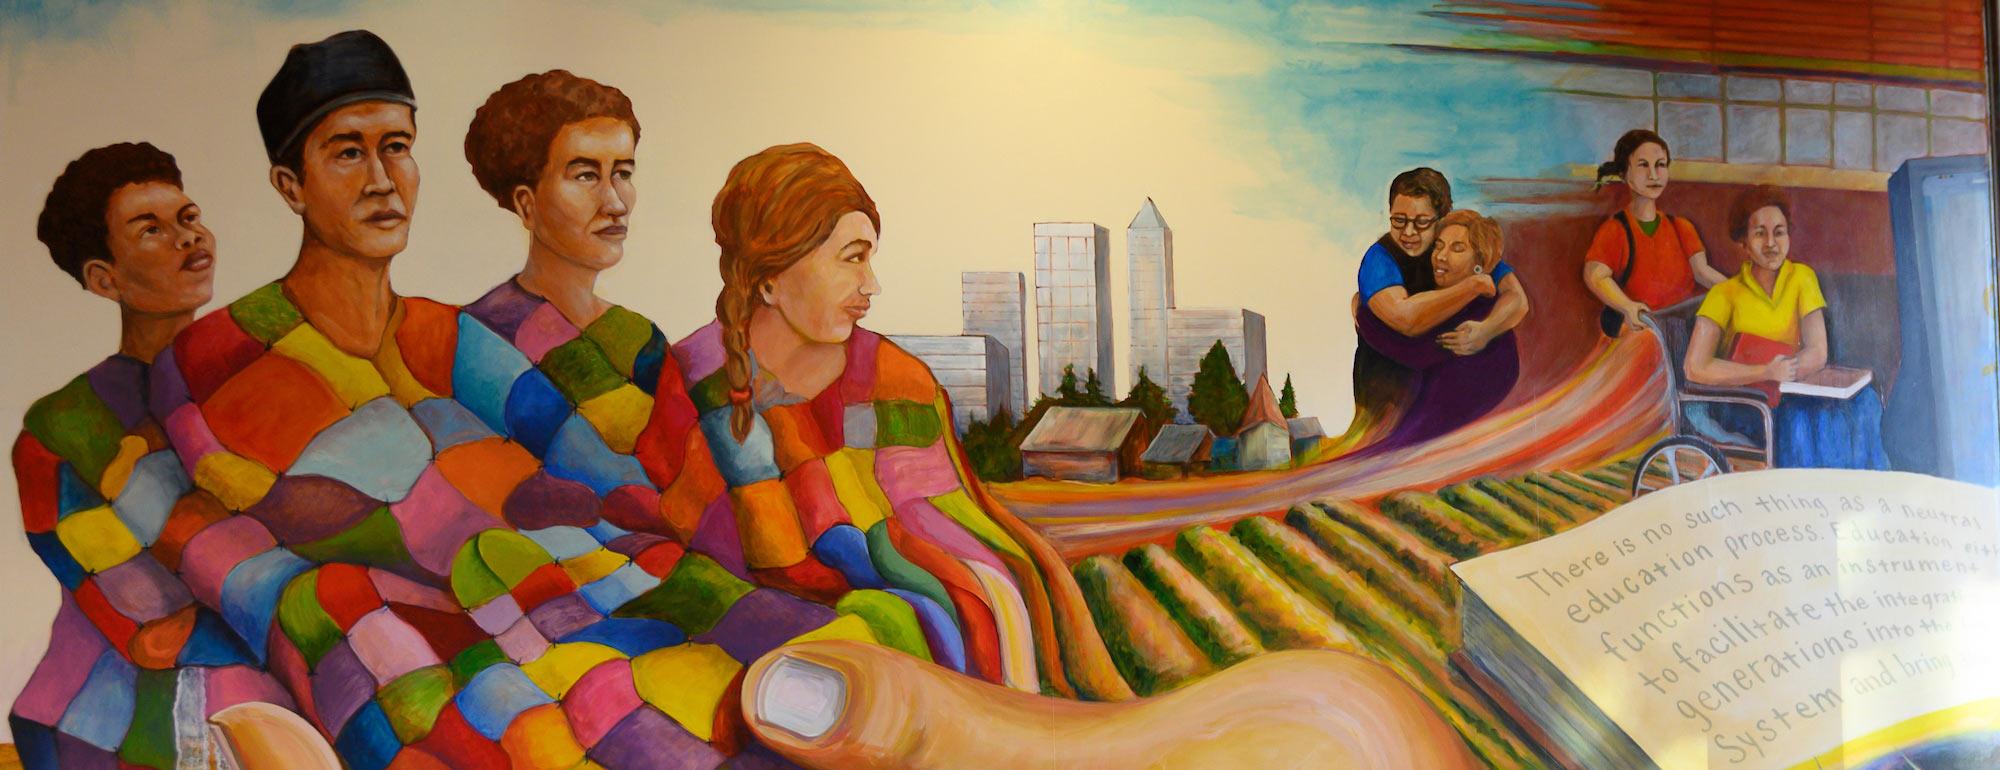 a mural with many cultures of people represented